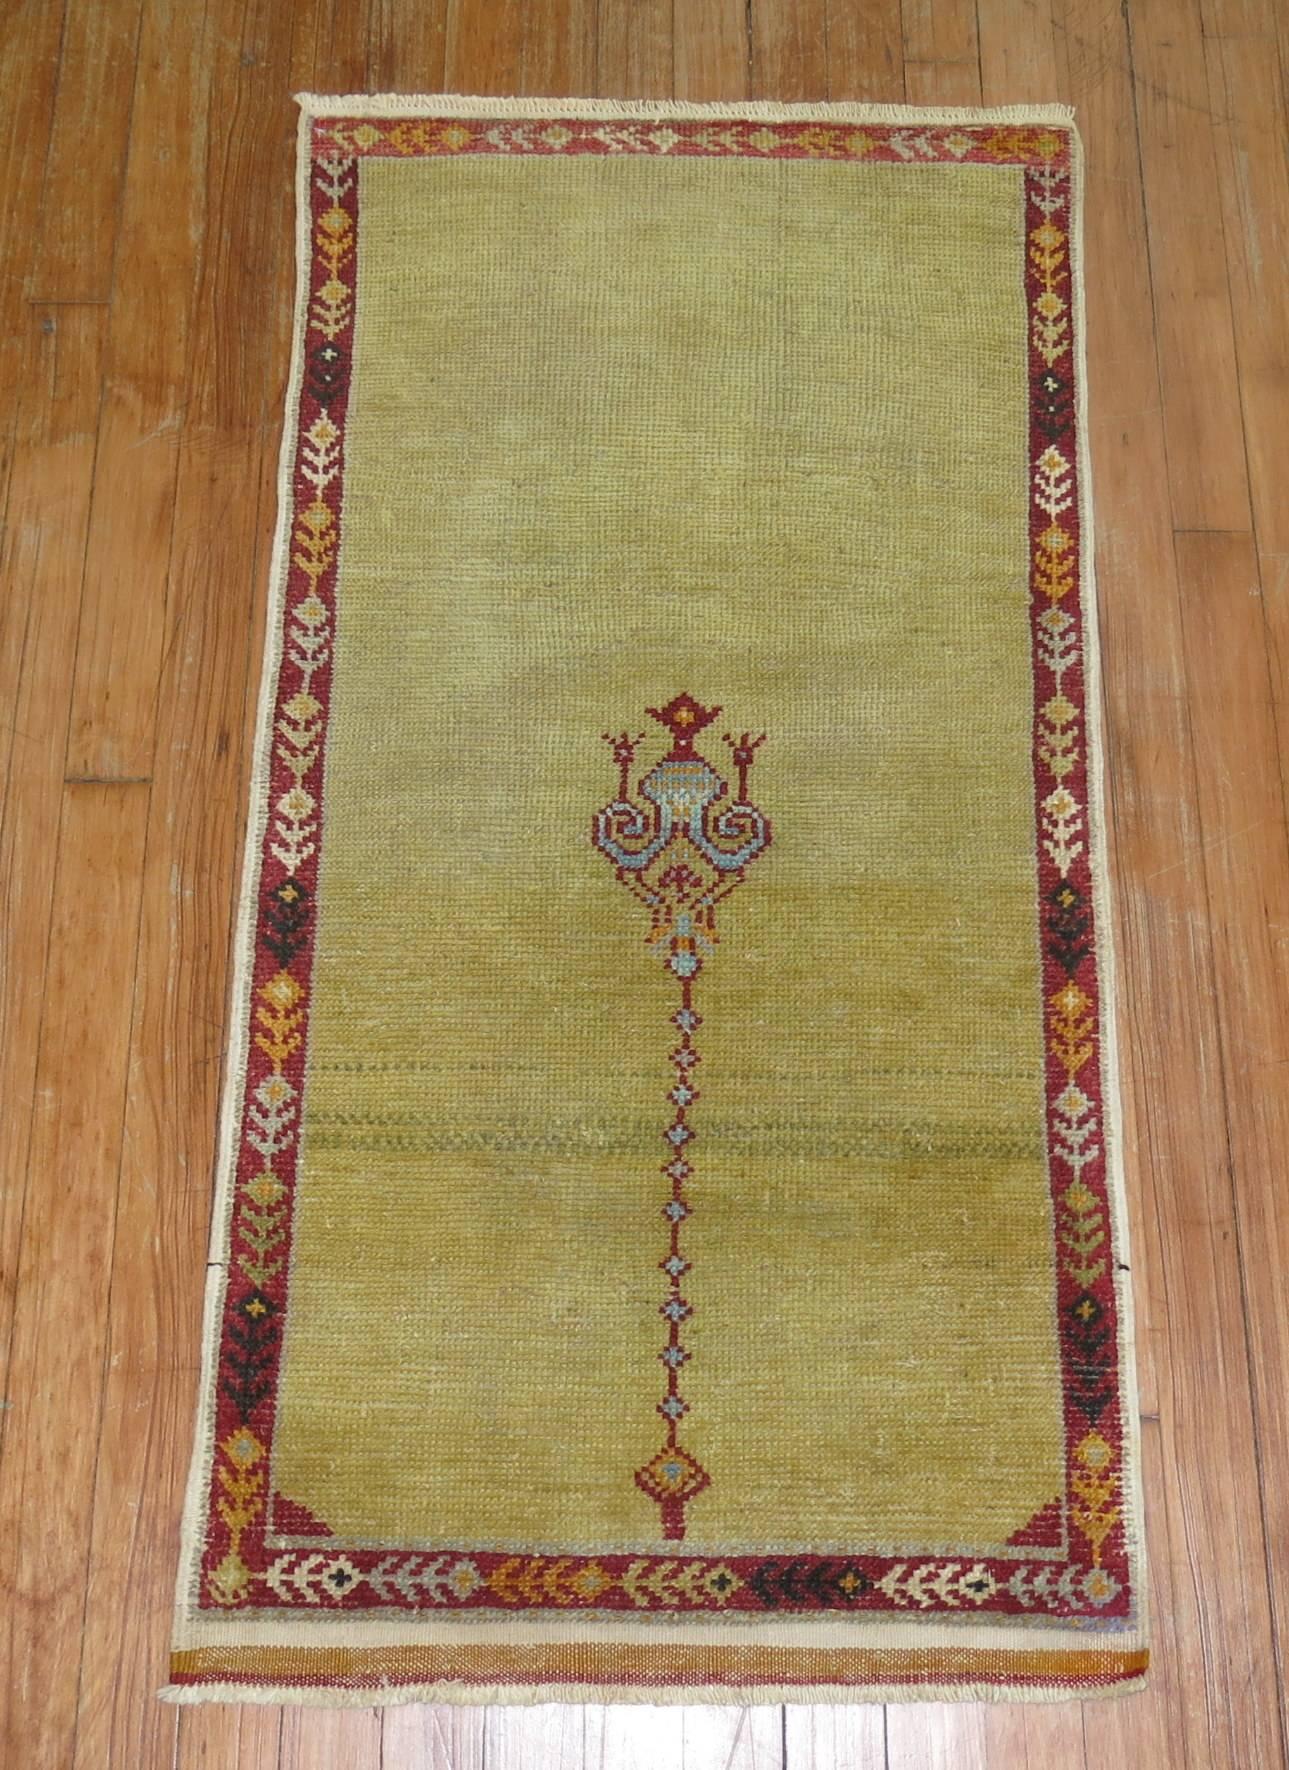 An antique Turkish rug with an irregular formal motif on a pea green colored ground.